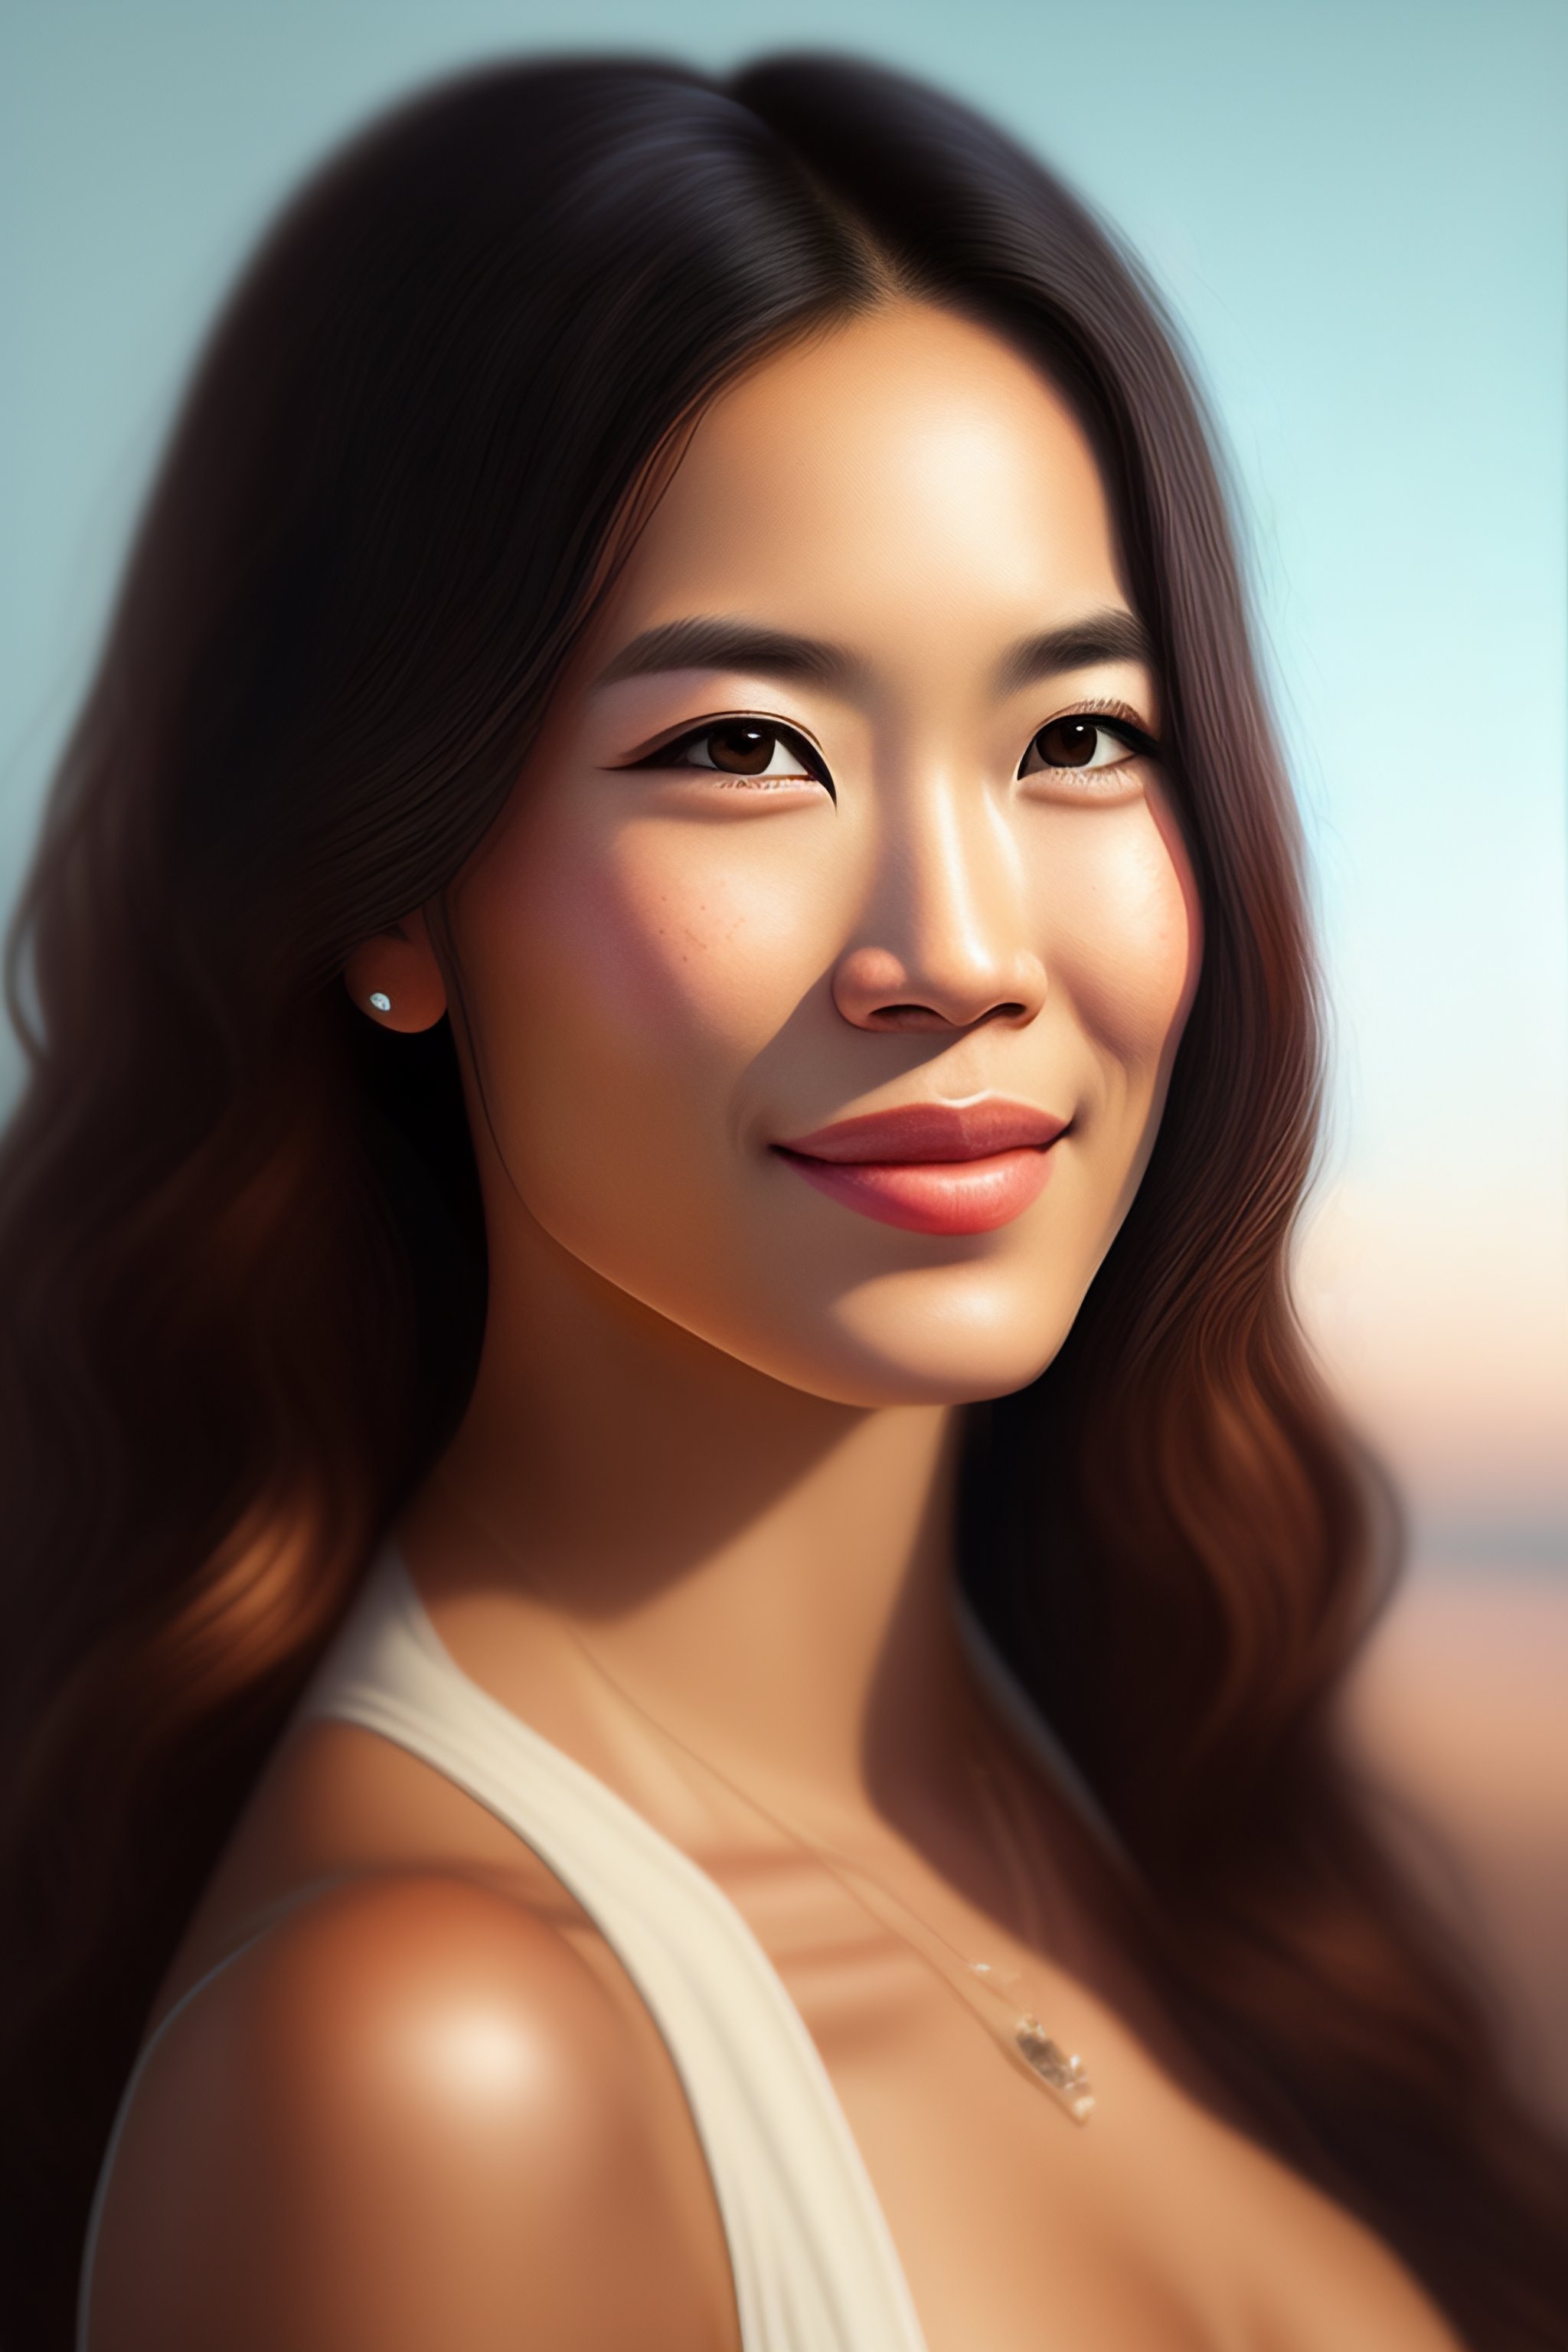 Lexica - My face in a photorealistic style